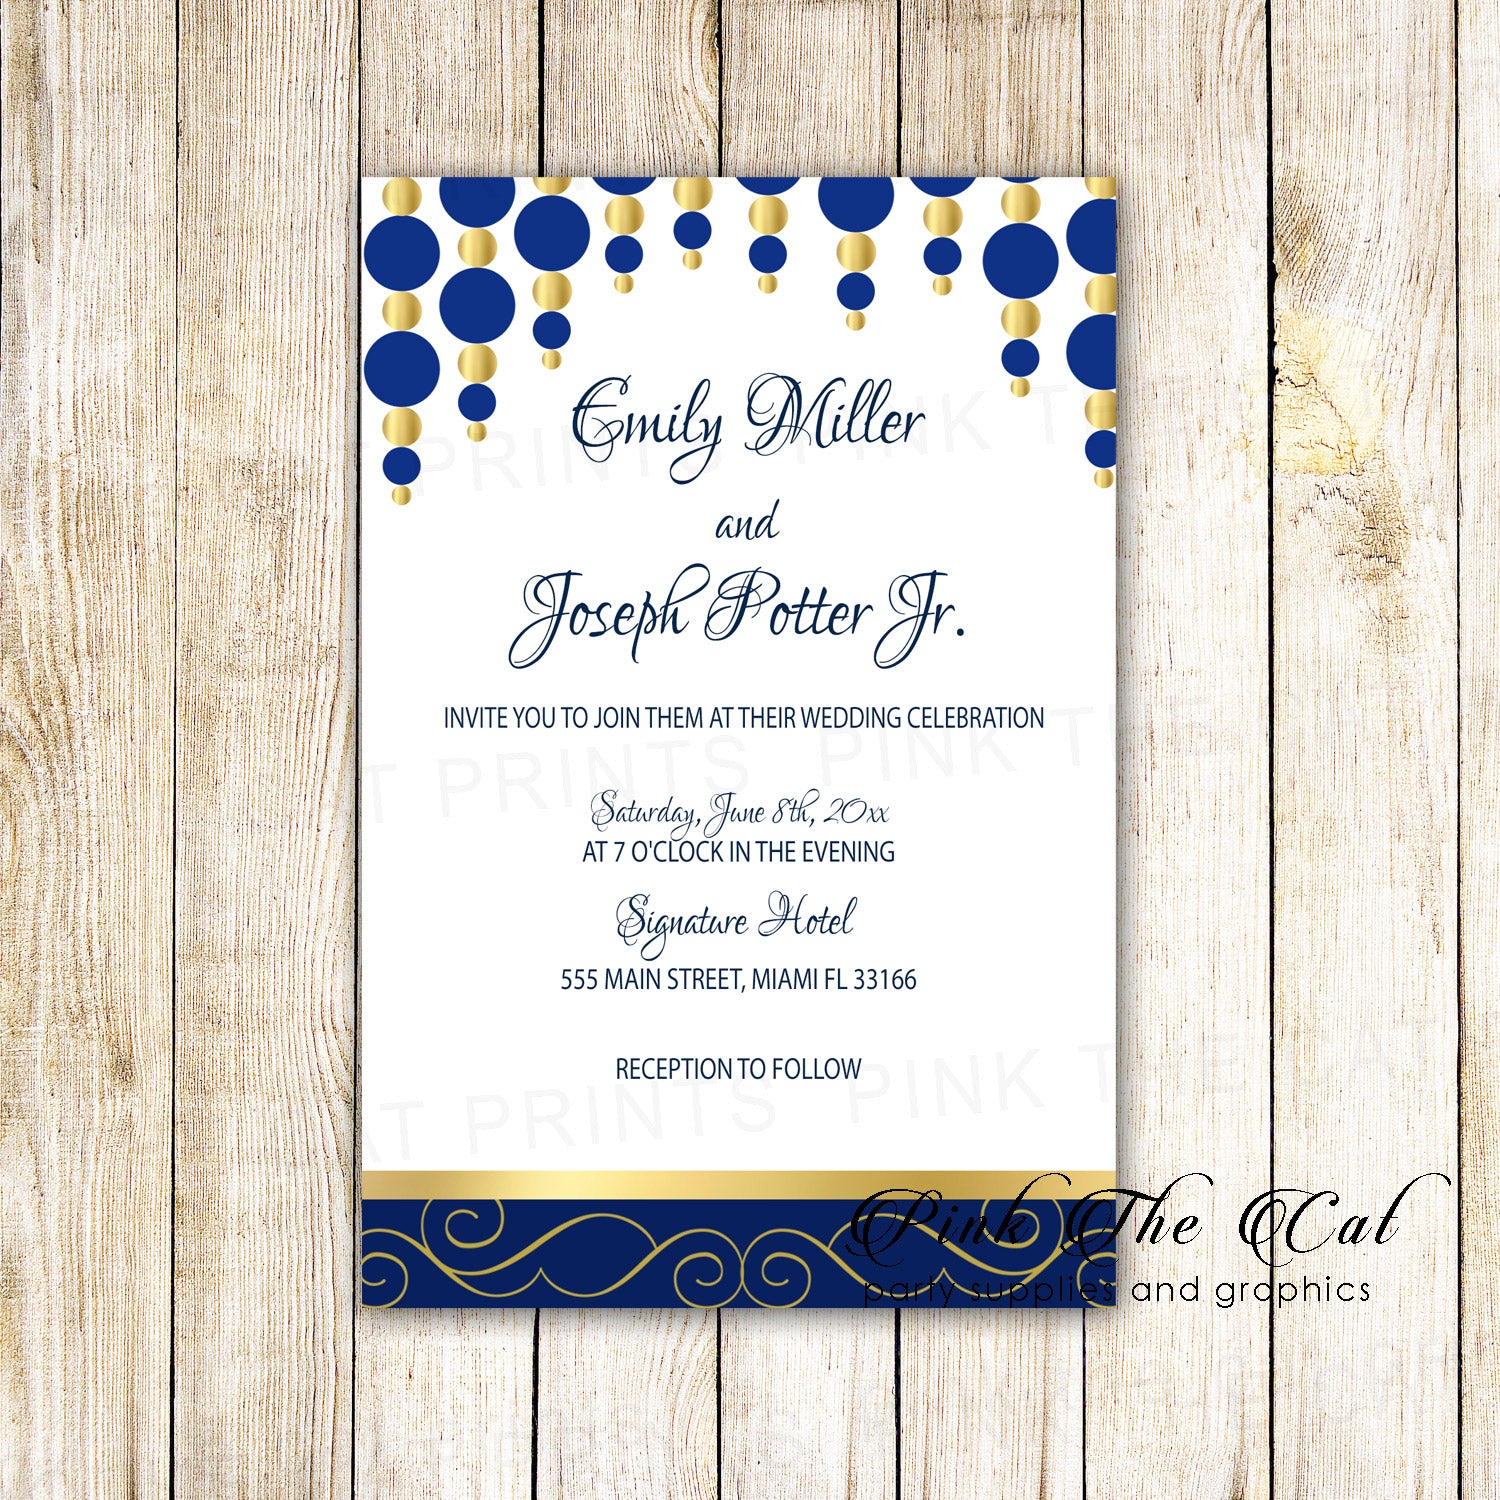 100 wedding invitations blue gold ornaments personalized & envelopes